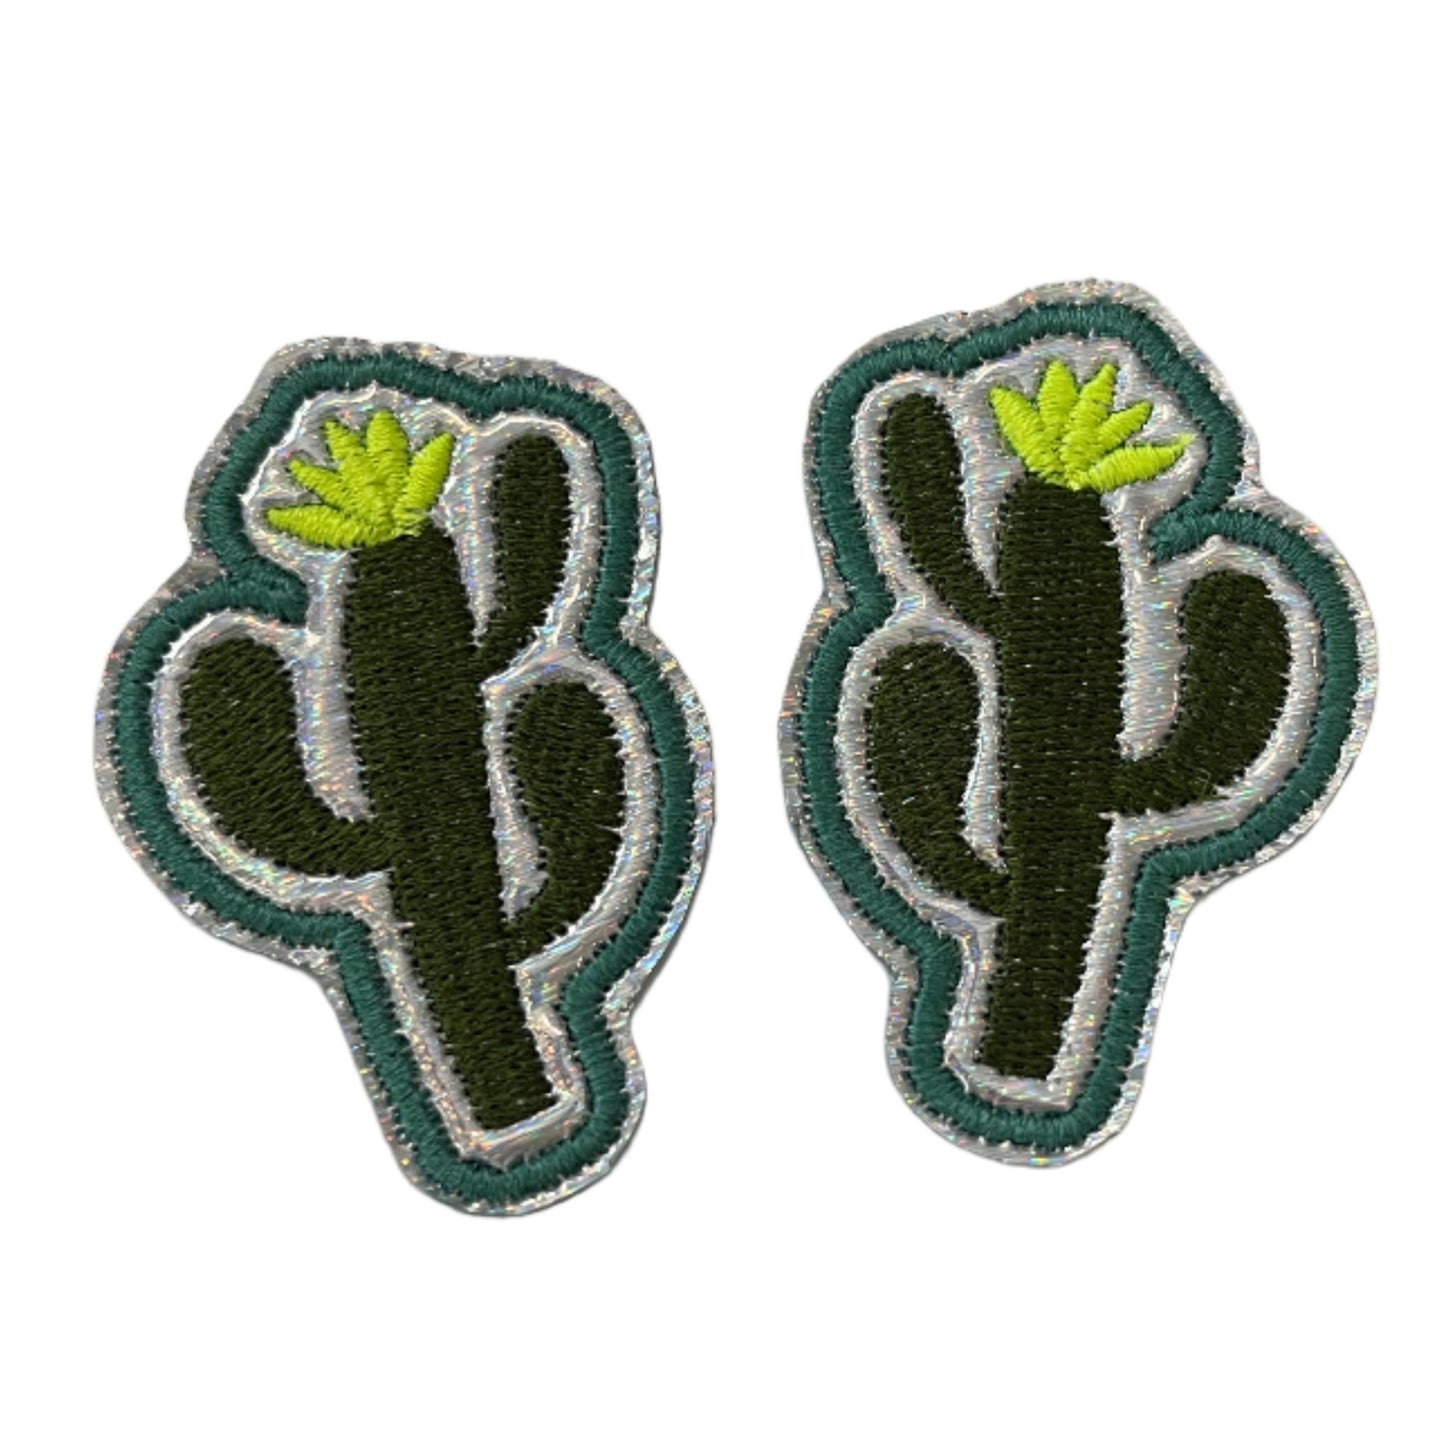 Cool Cactus Patch for Custom Hats, Apparel, and Accessories